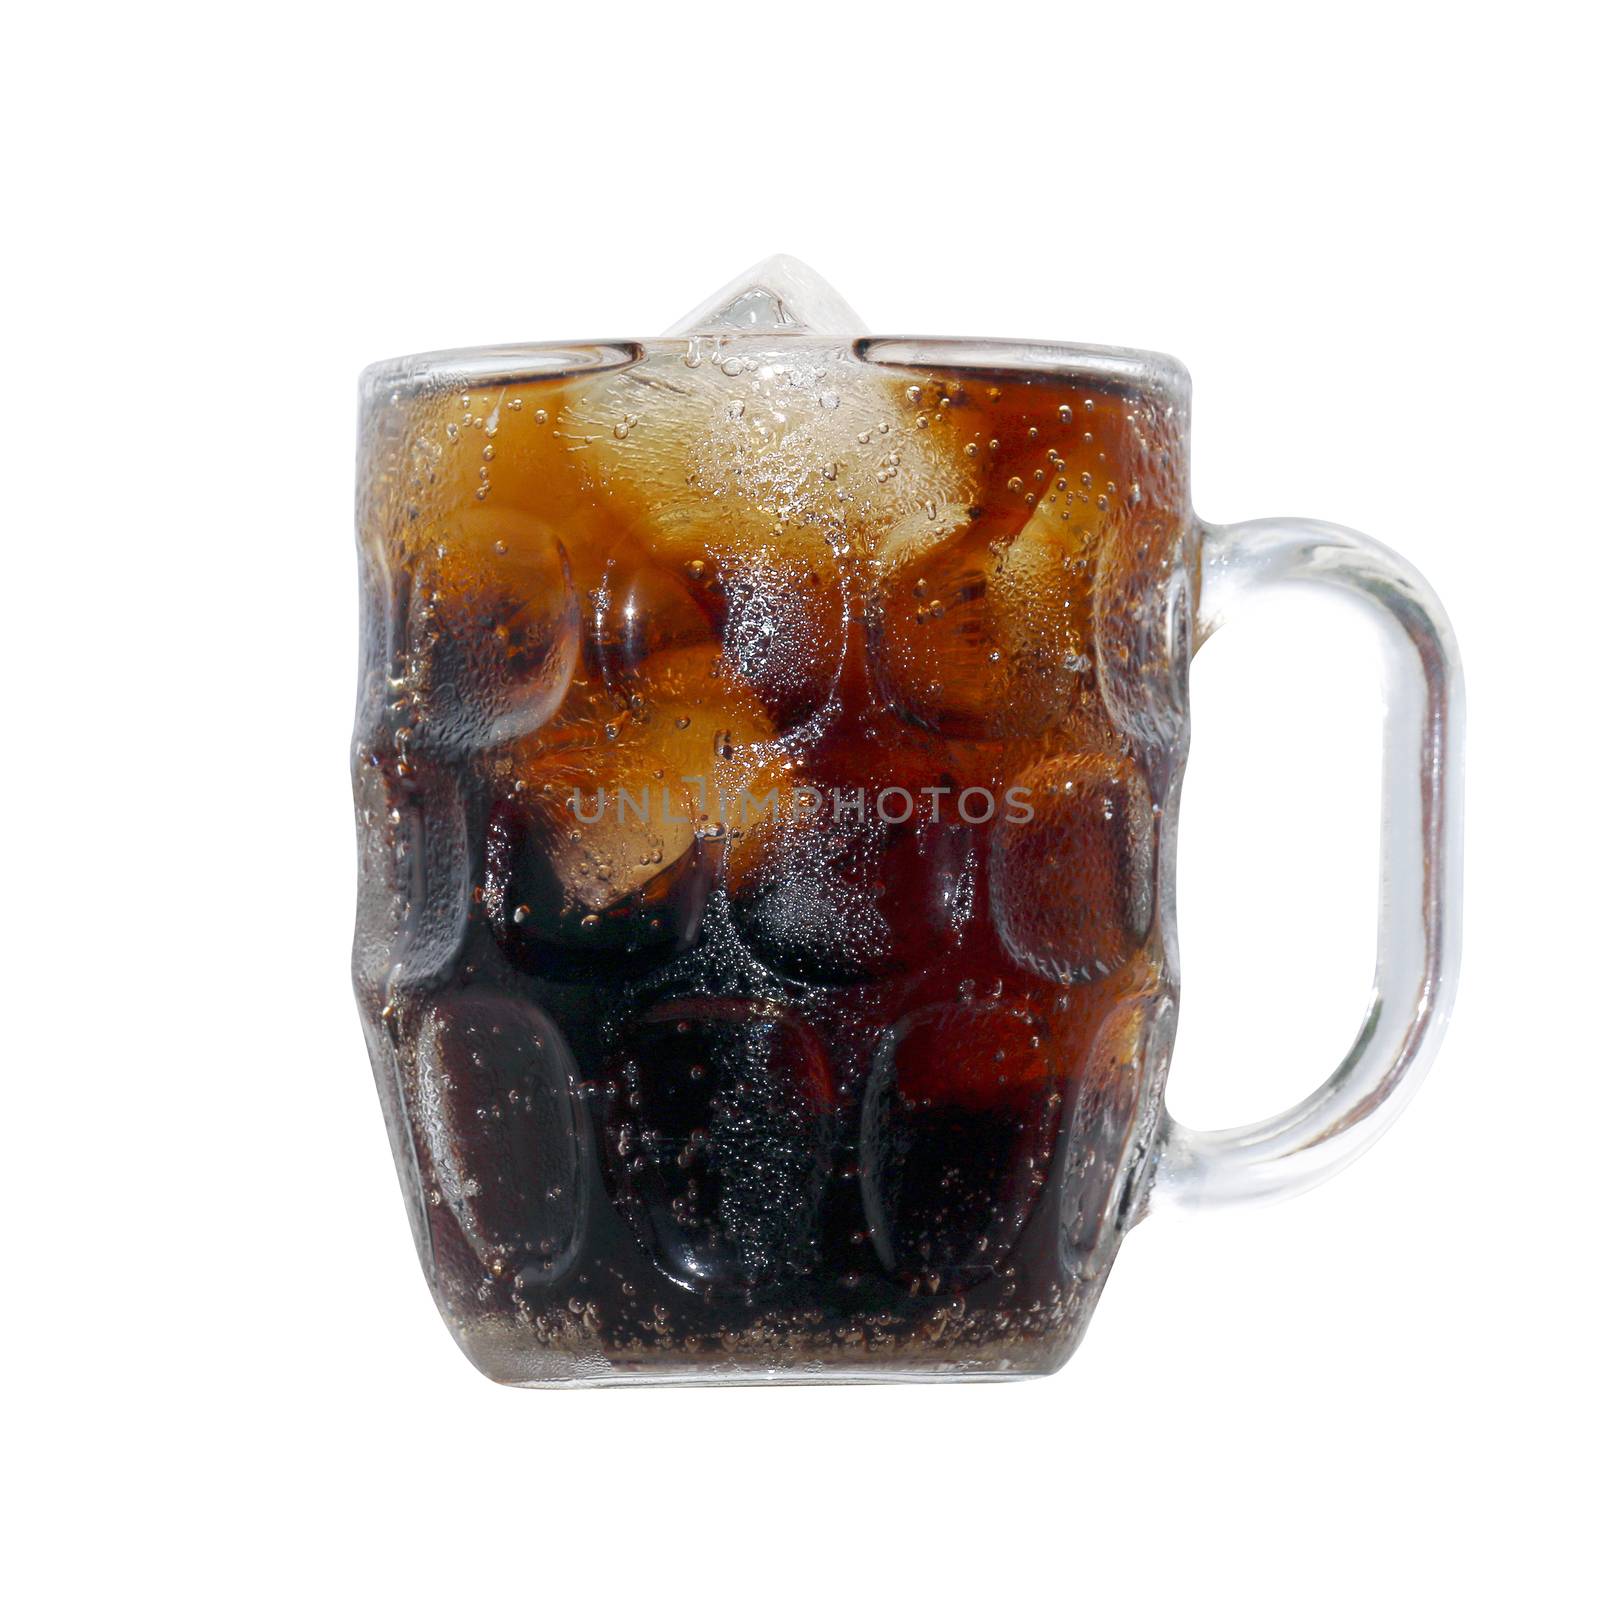 black cola soda in glass with ice cubes for refreshments feel, beverage cola and cubes ice refreshing cool in glass isolated on white background